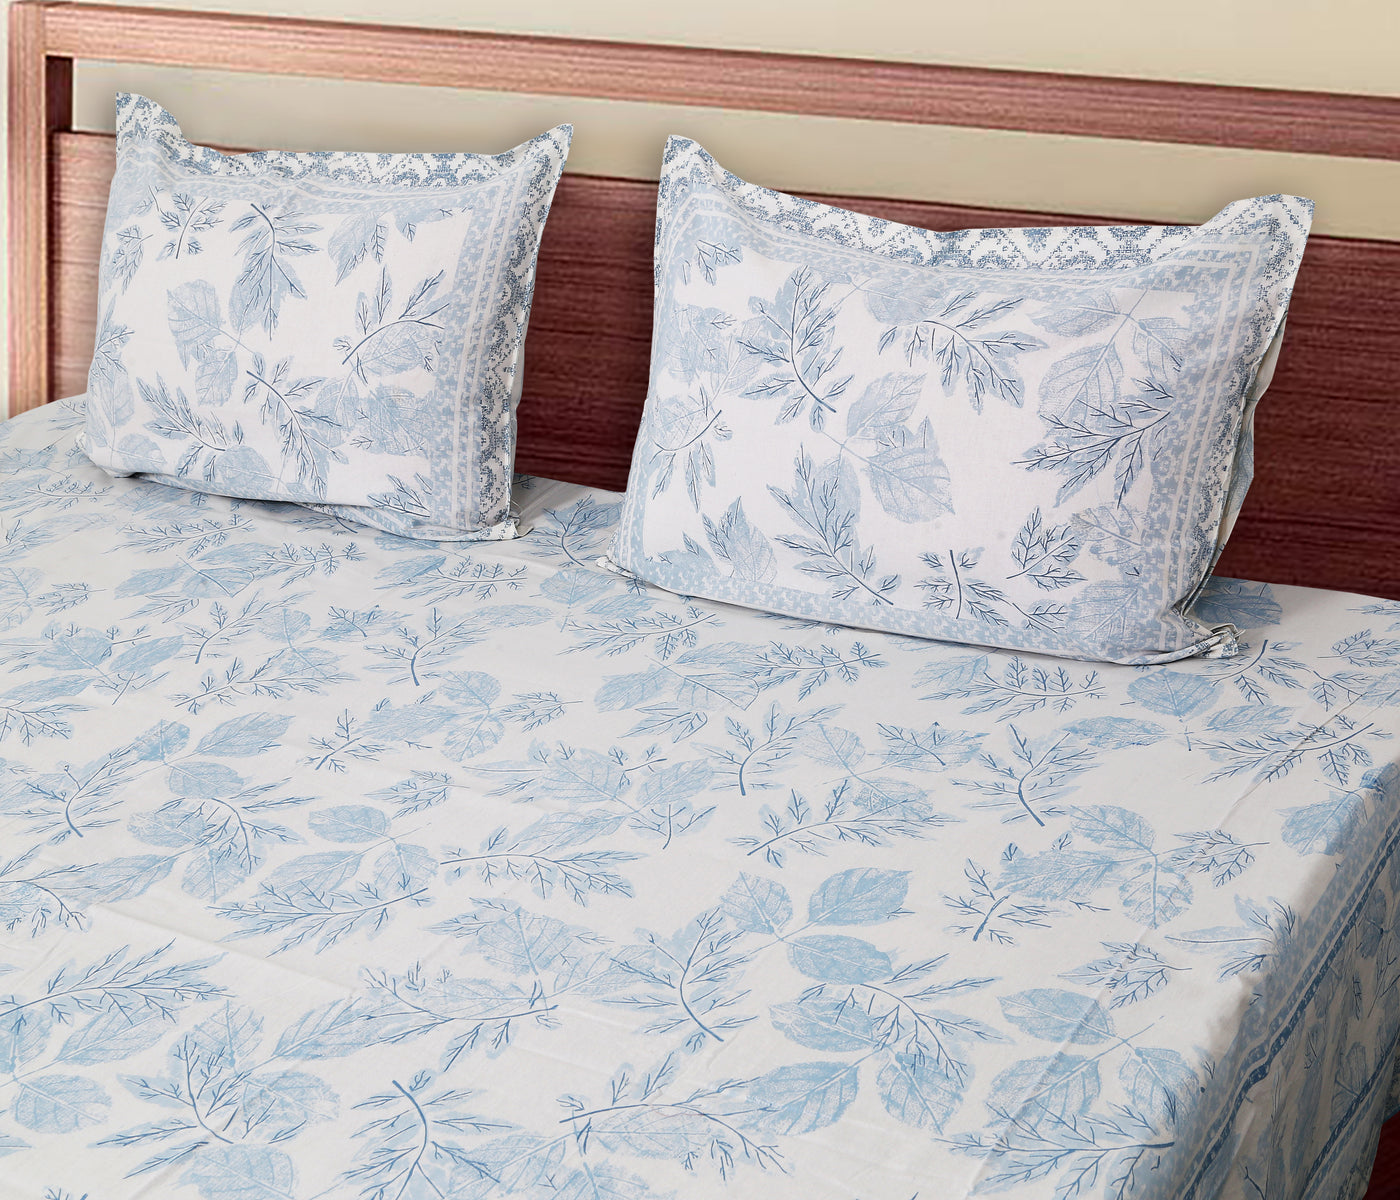 Braise Premium | Medium Size 70 x 100 in | 100% Pure Cotton | Double Bedsheet with 2 Pillow Covers (ART7002)